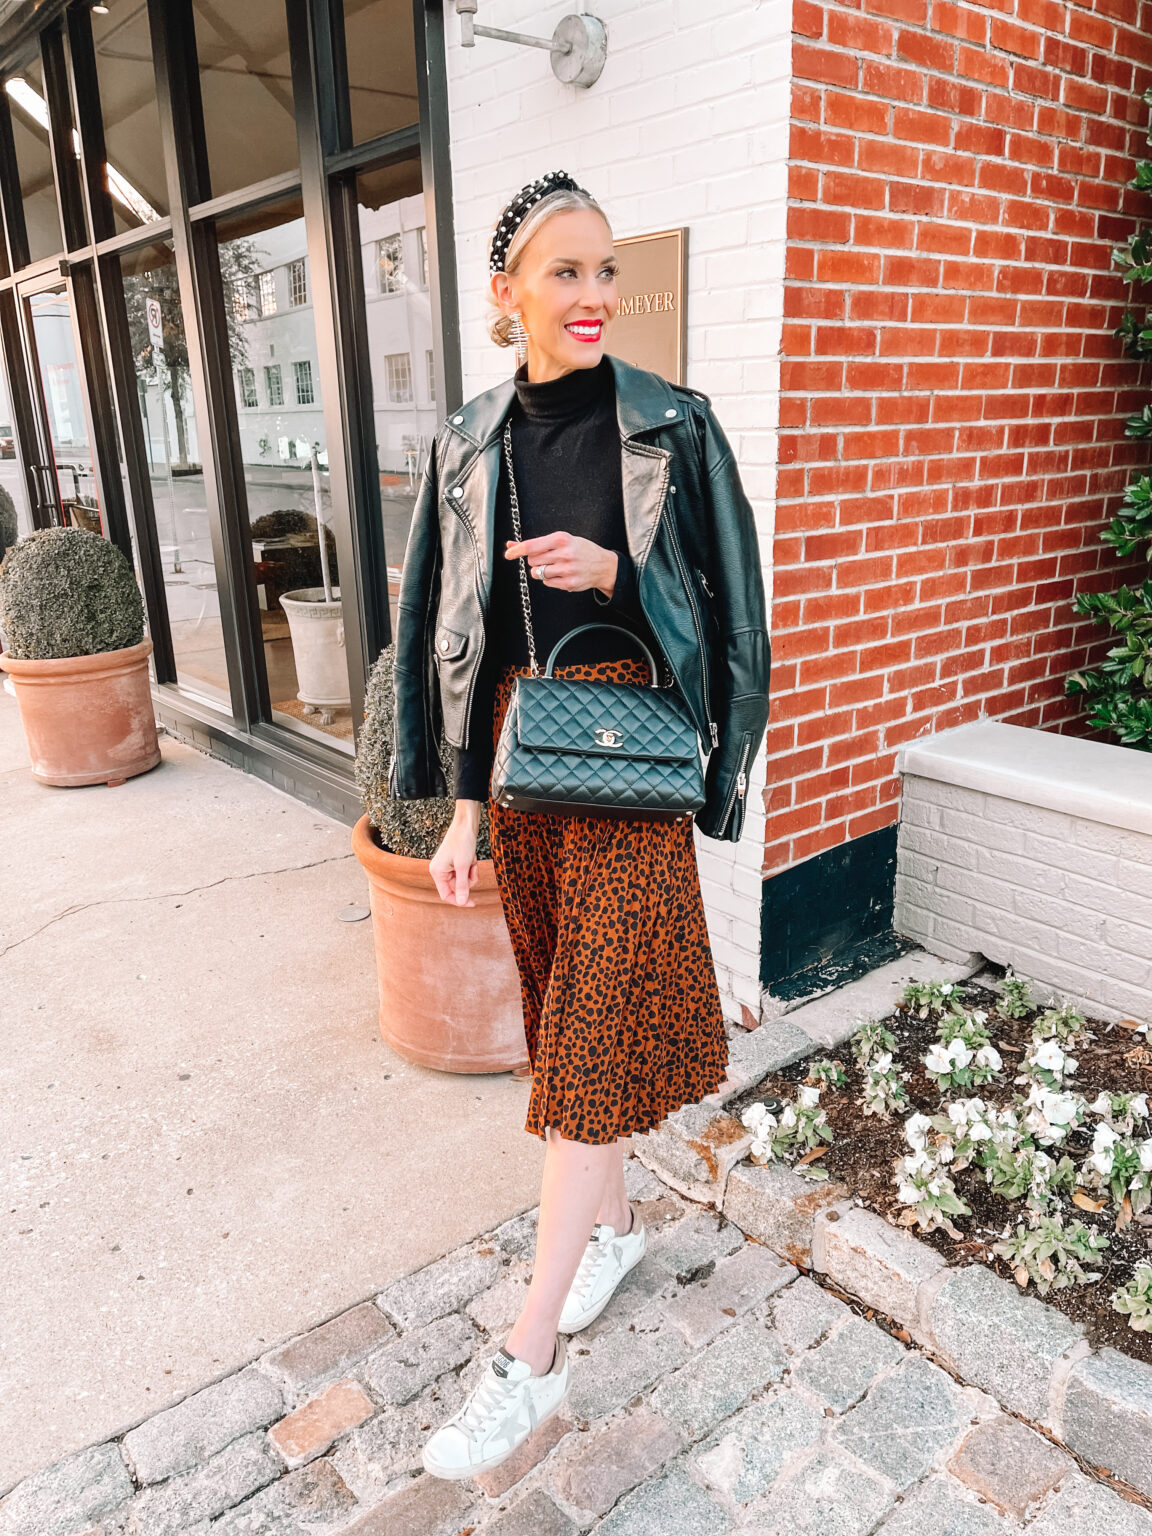 5 Ways to Wear a Leopard Midi Skirt - Straight A Style